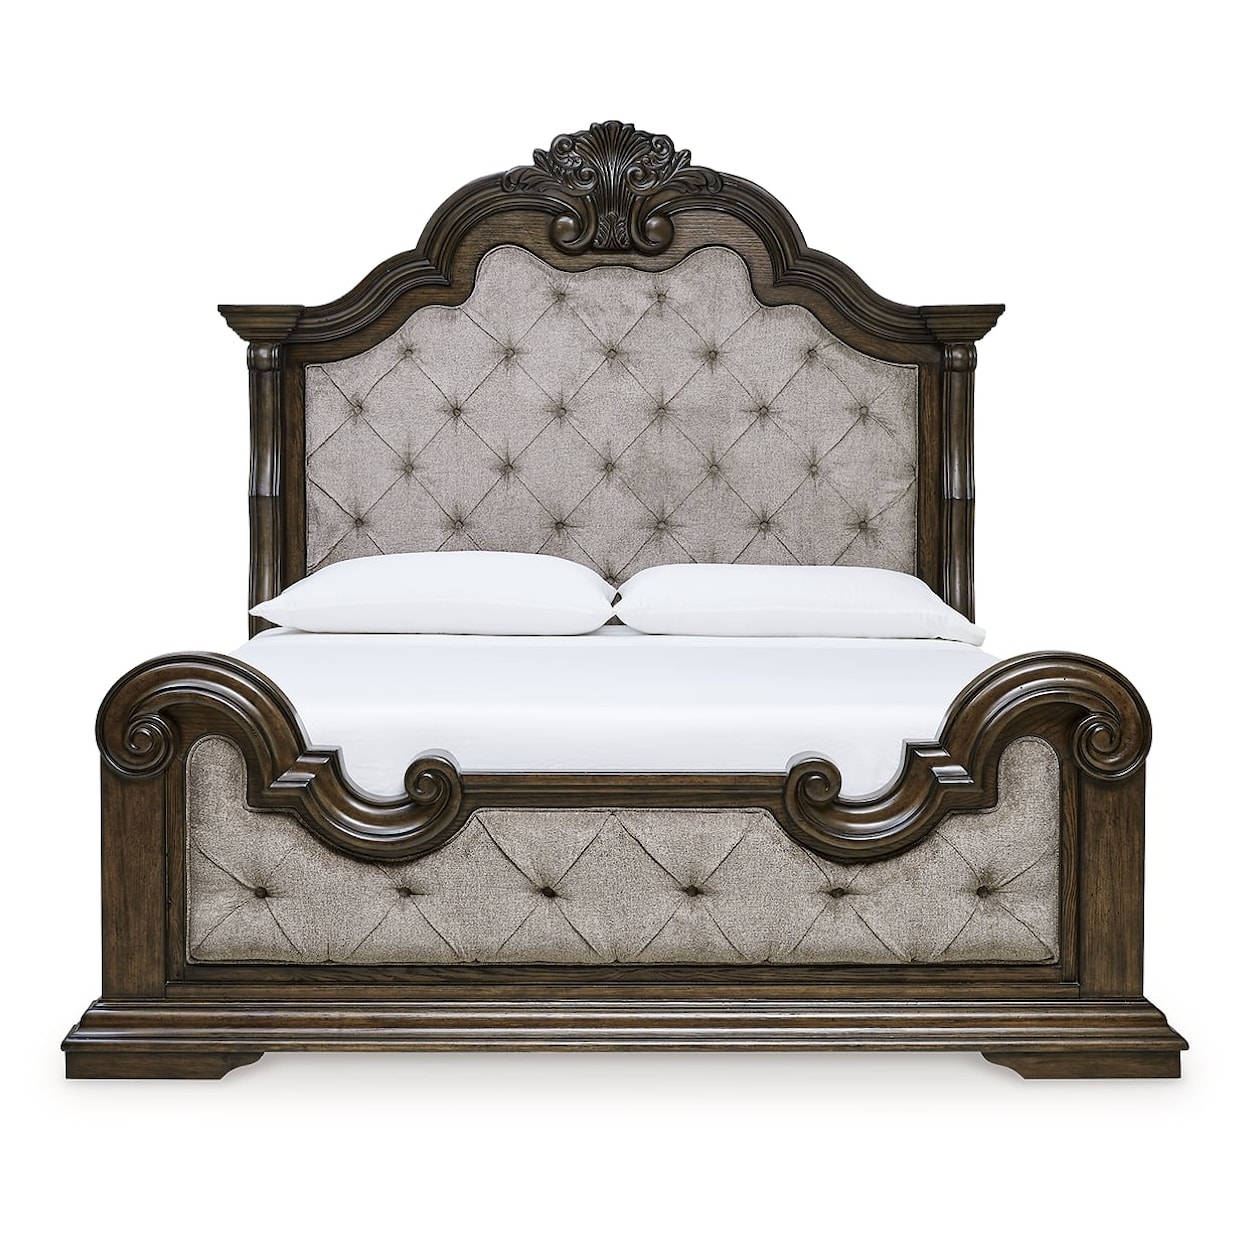 Signature Design by Ashley Maylee California King Upholstered Bed